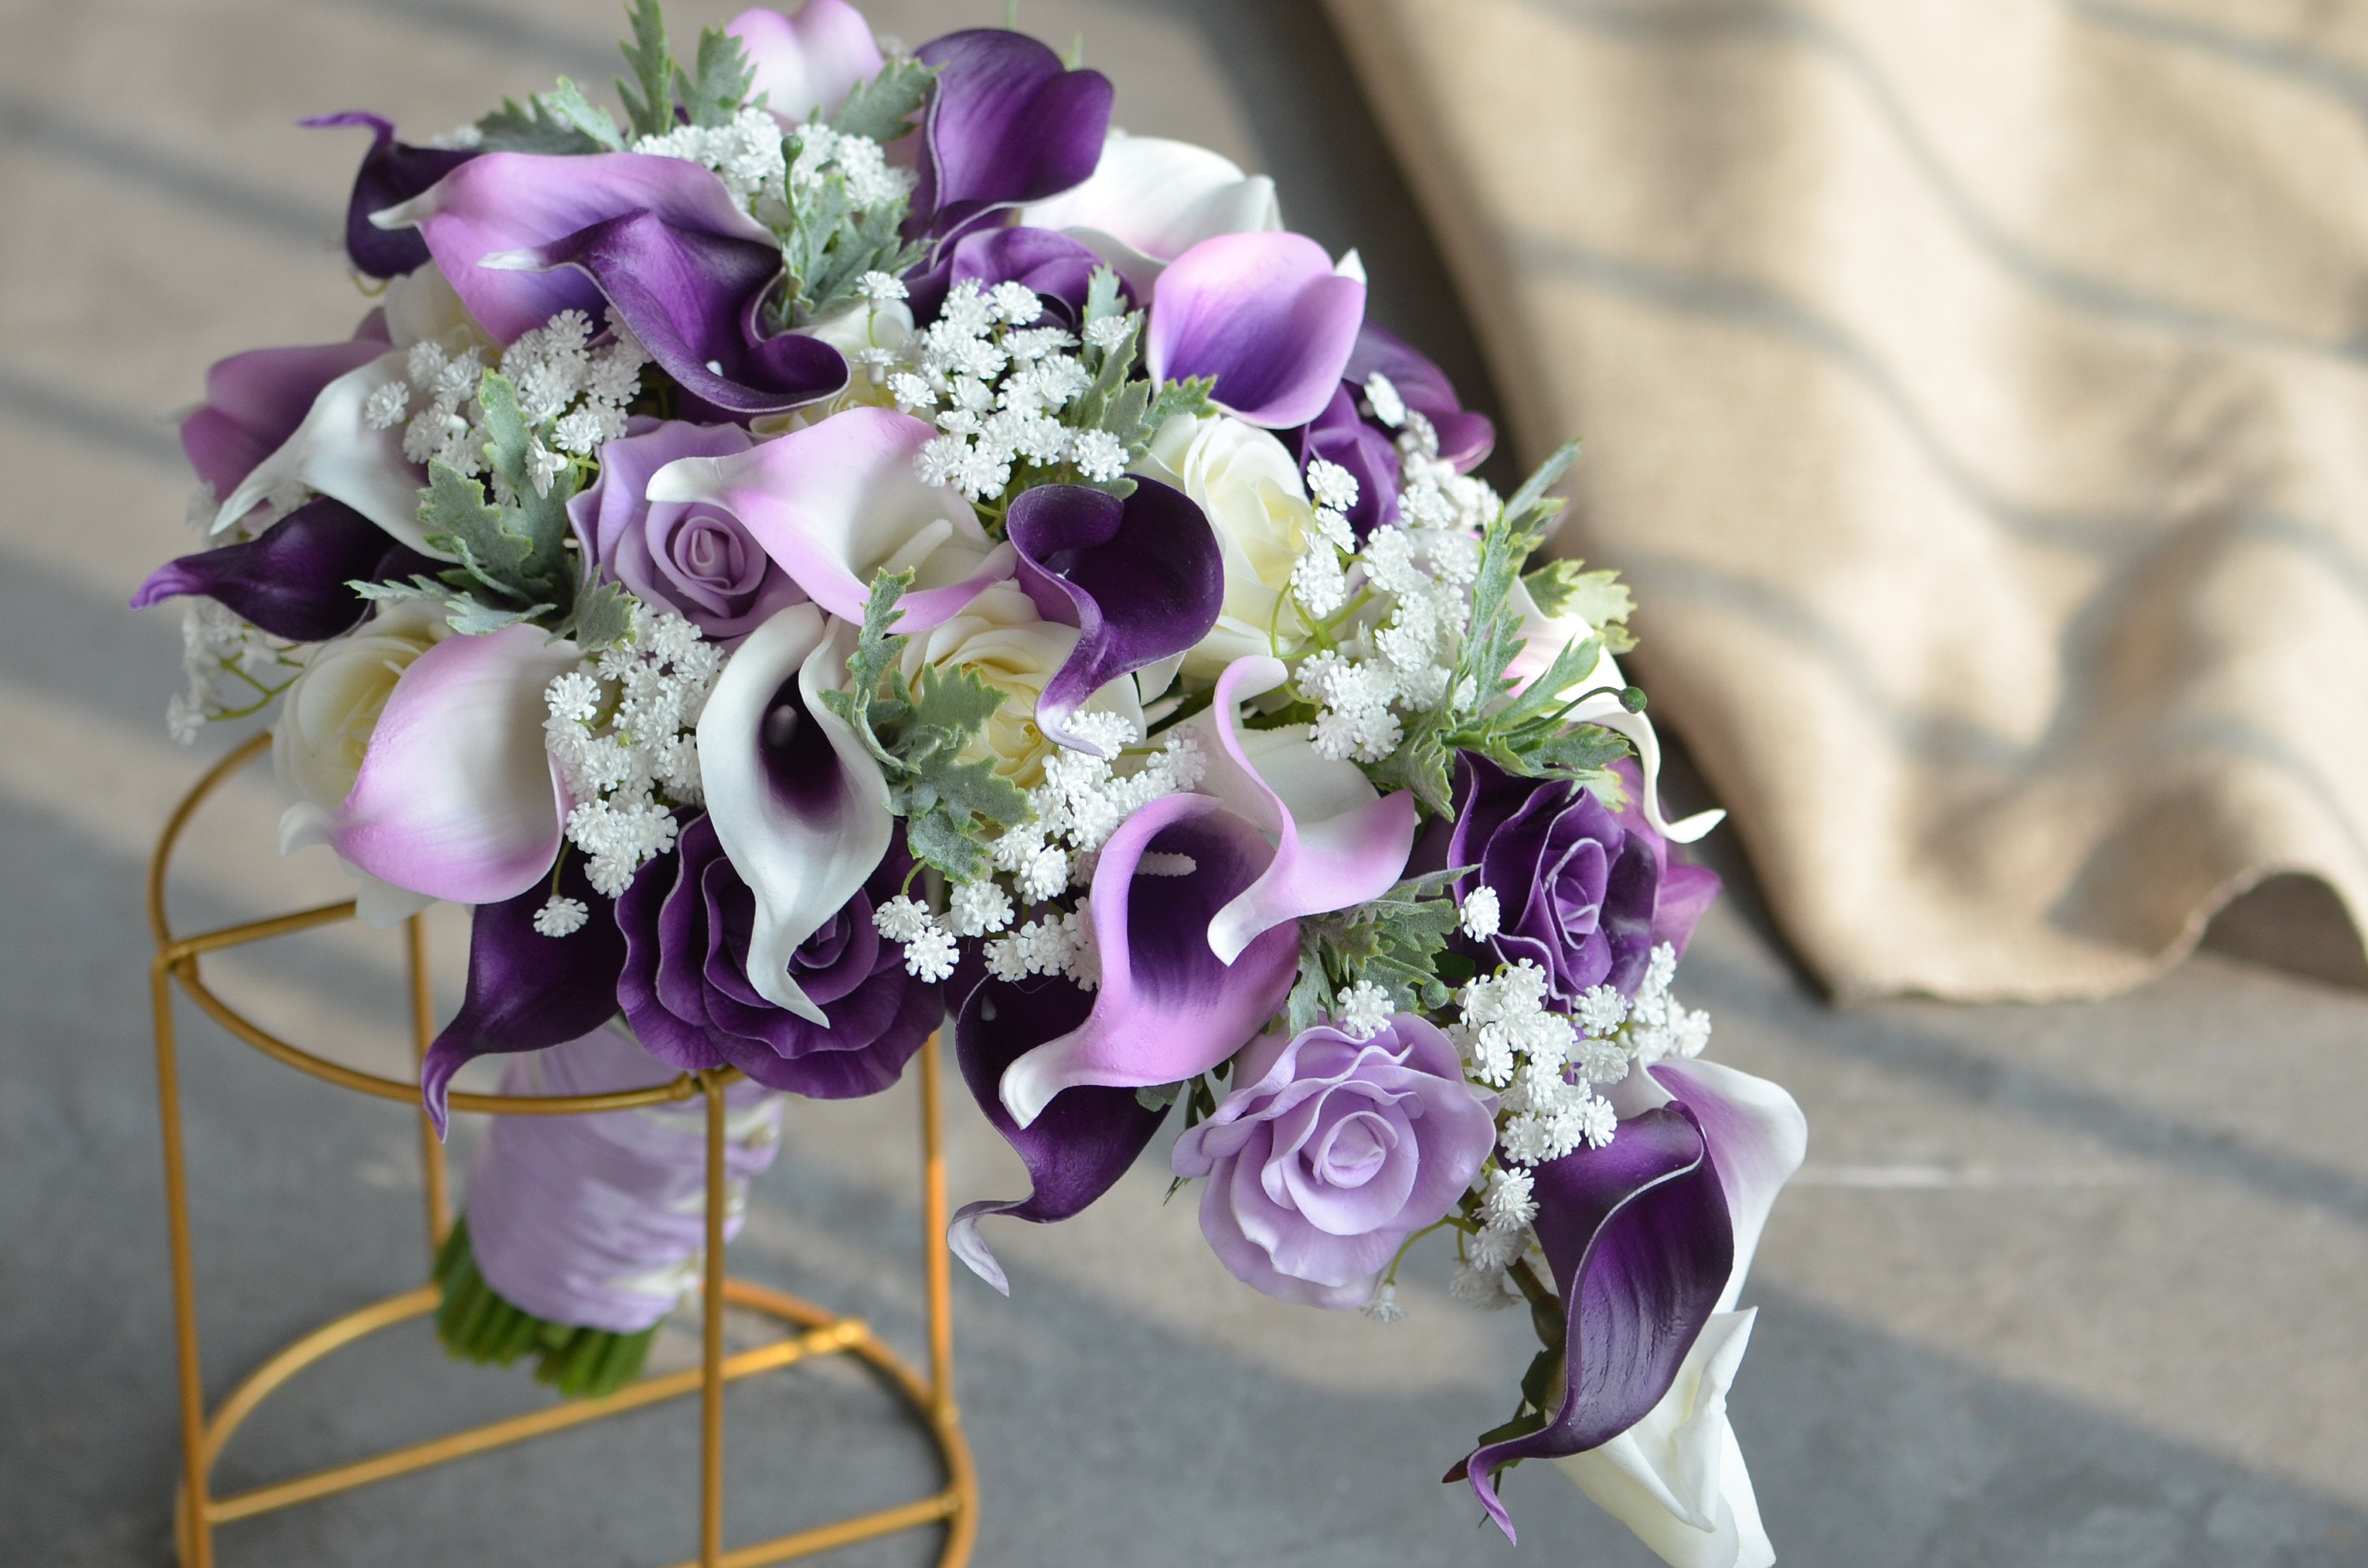 Fake Purple Bridal Bouquets, Bridesmaids Bouquets, Rustic Silk Bridal  Bouquet, Real Touch Calla Lilies, Ivory White Roses, Baby's Breath - Etsy  Sweden